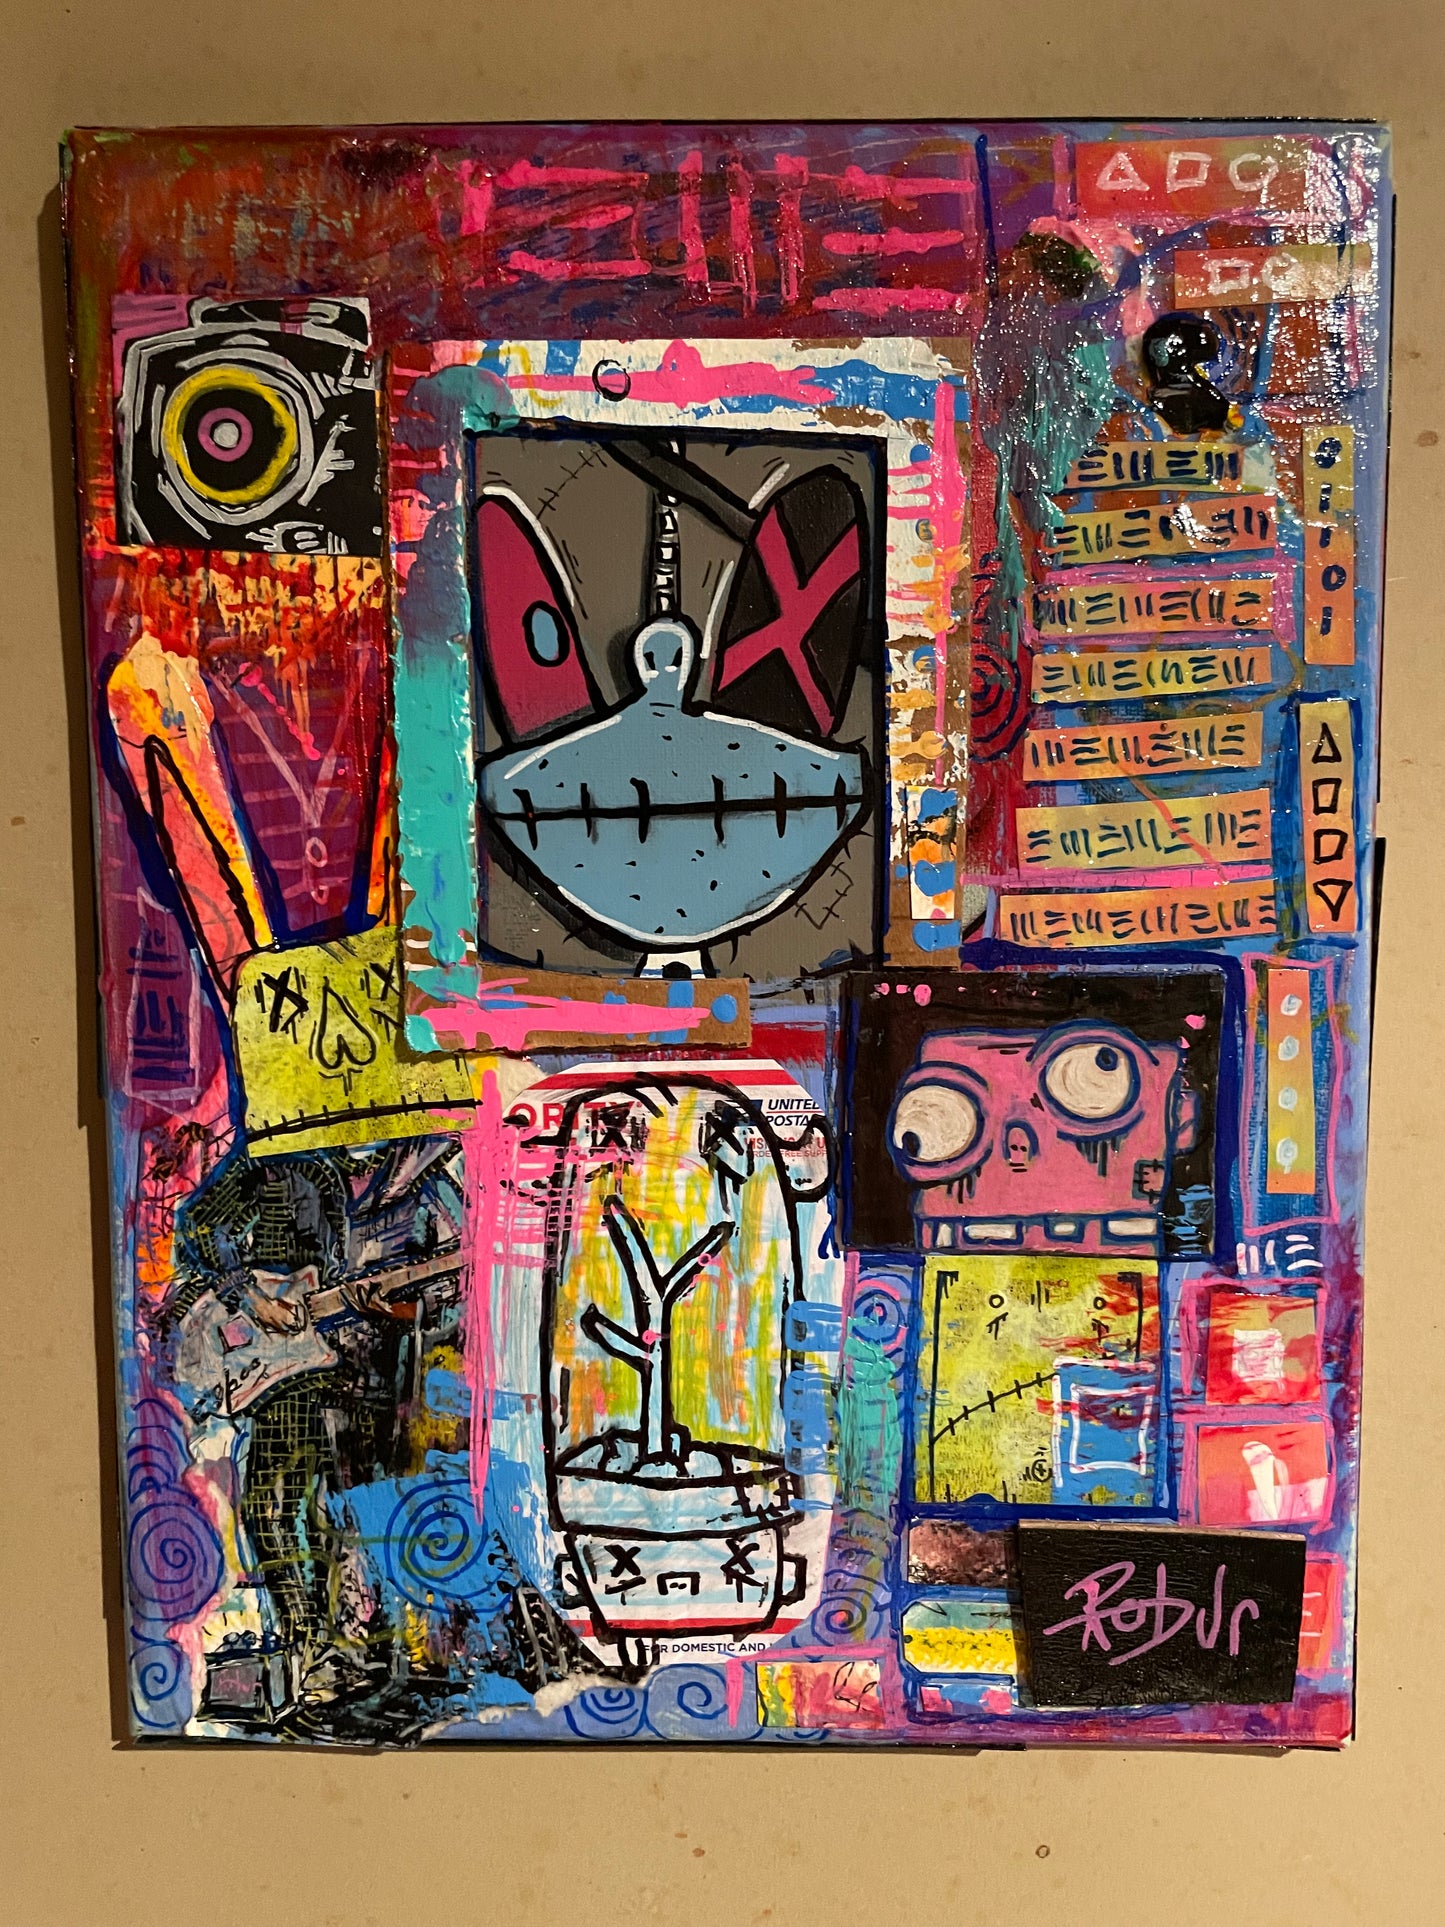 11in by 14in Mixed Media On Canvas. "Austin Buskers".